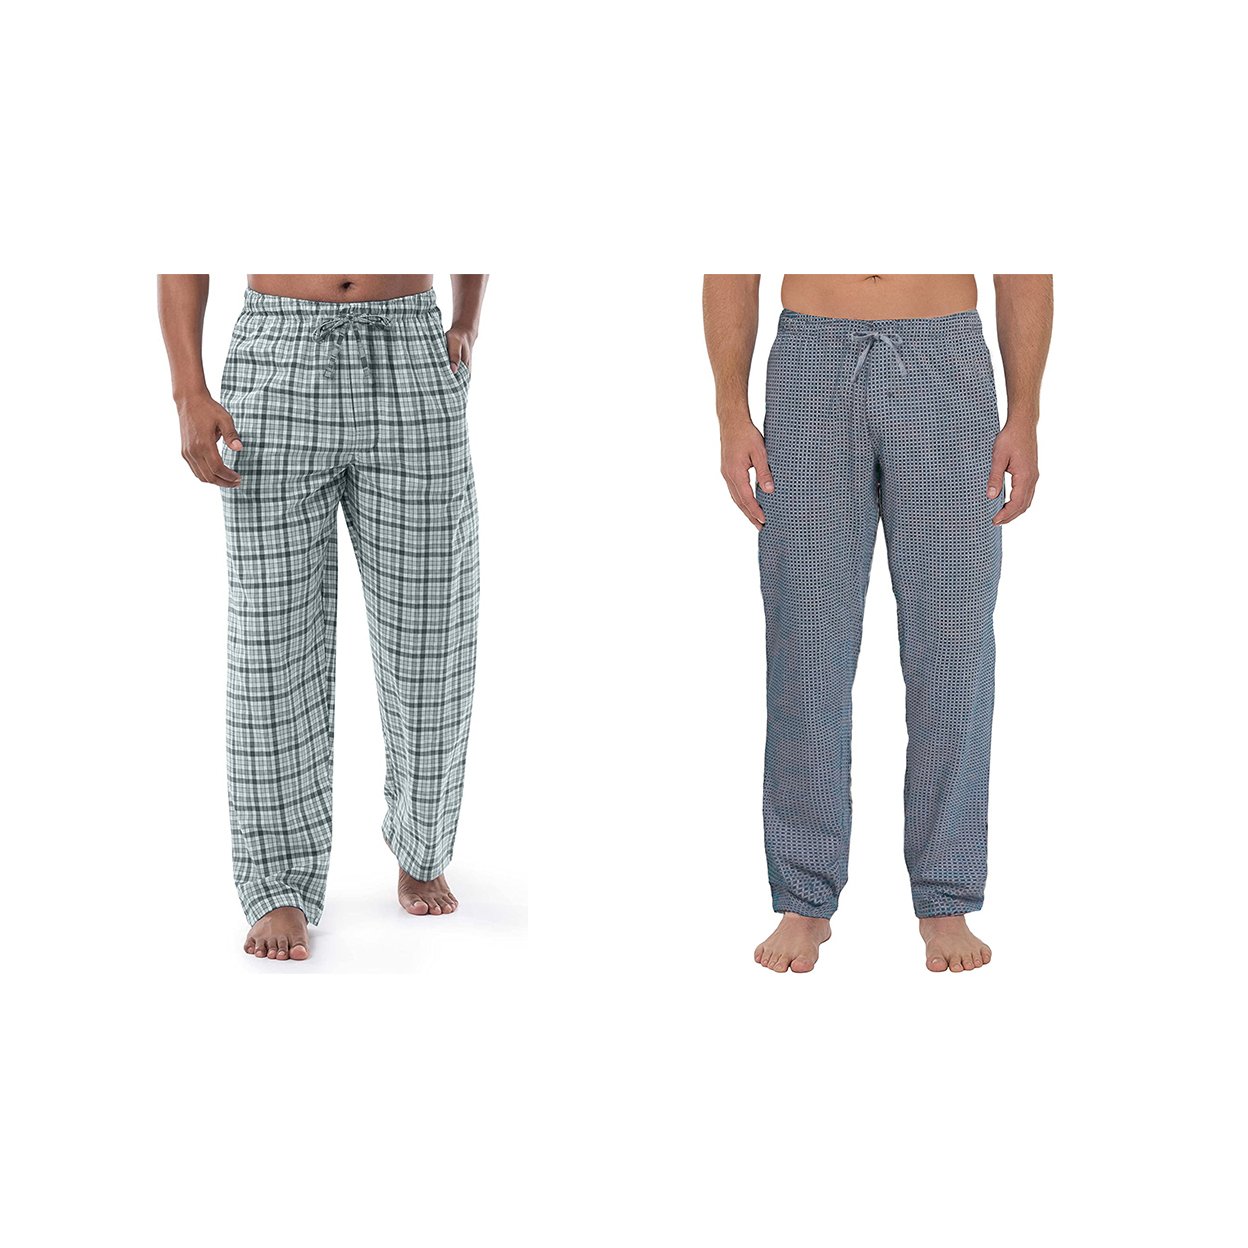 Bargain Hunters 3-Pack: Mens Soft Jersey Knit Long Lounge Sleep Pants with Pockets